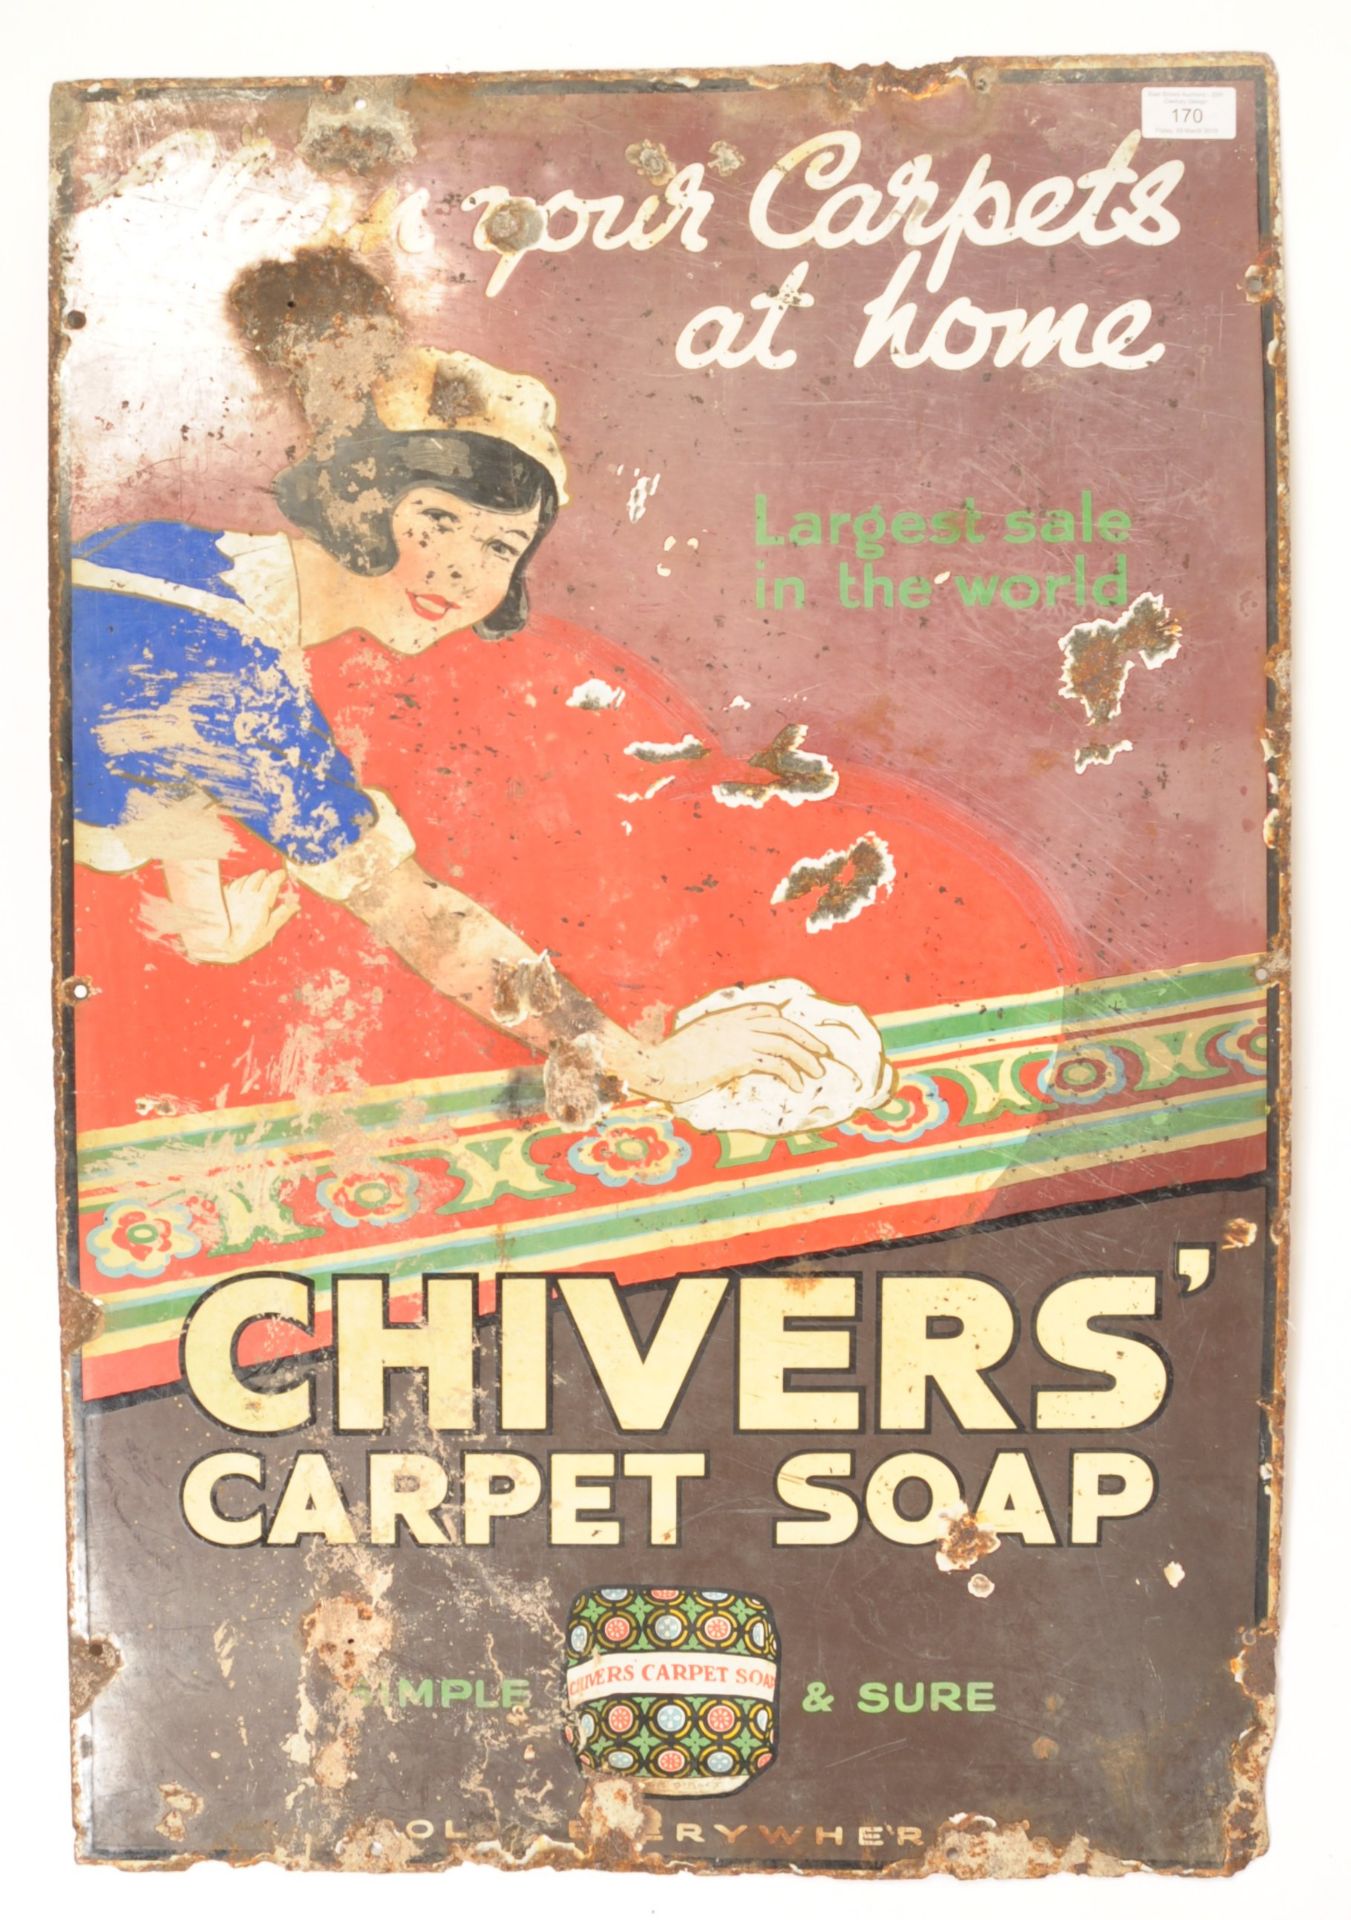 EARLY 20TH CENTURY CHIVERS' CARPET SOAP PORCELAIN ENAMEL SIGN